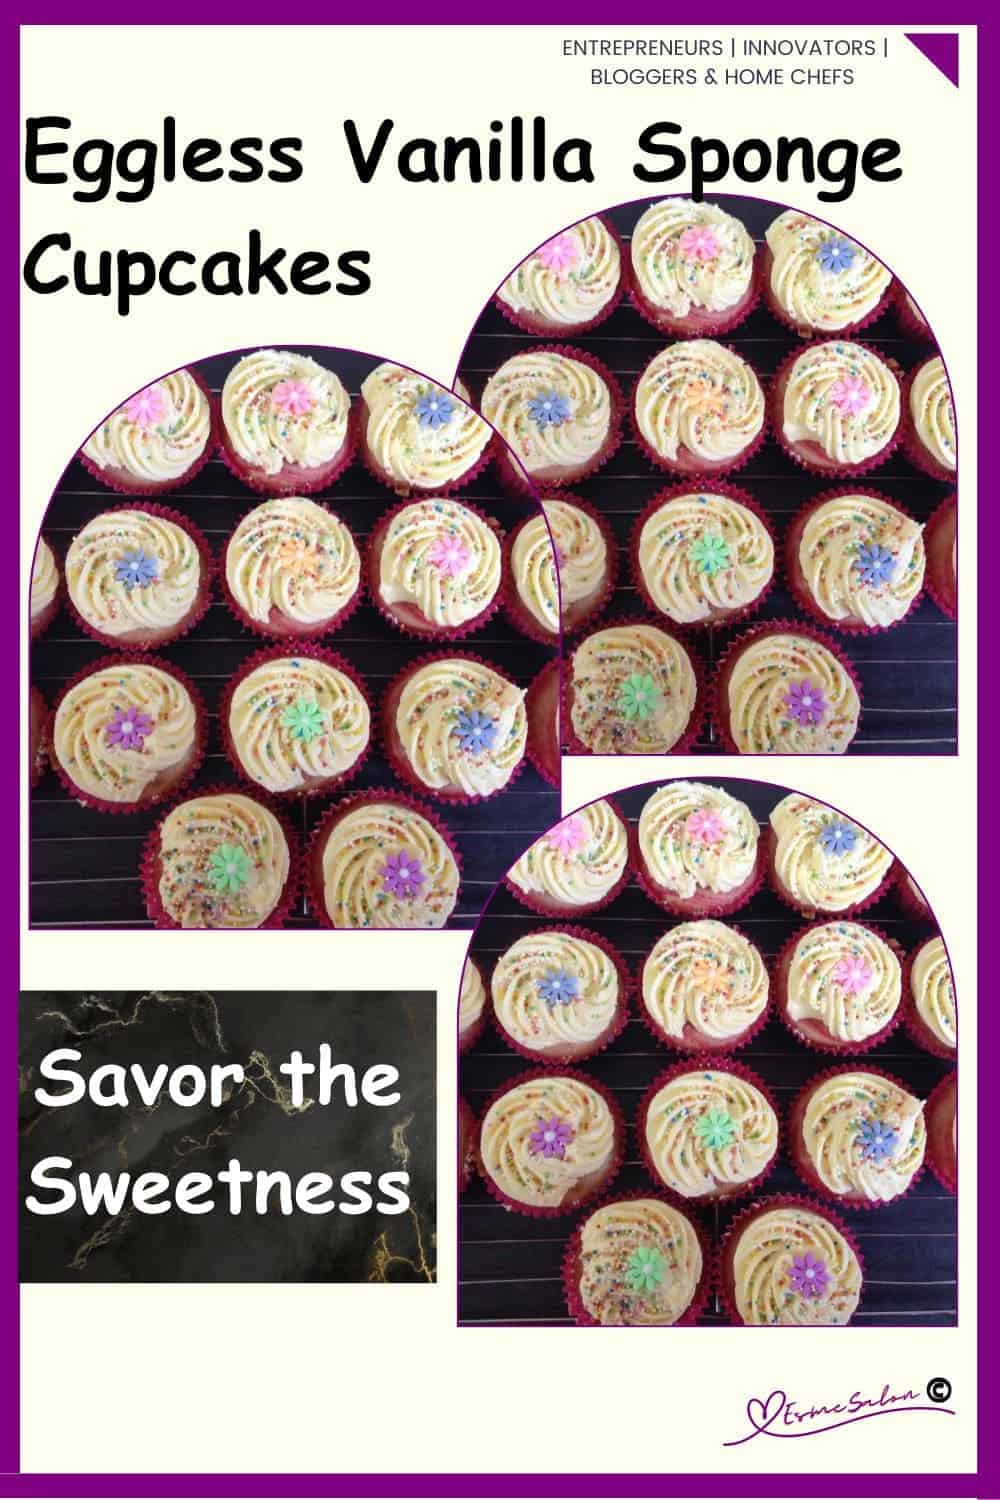 an image of a tray filled with Vanilla Egg-free cupcakes decorated with buttercream